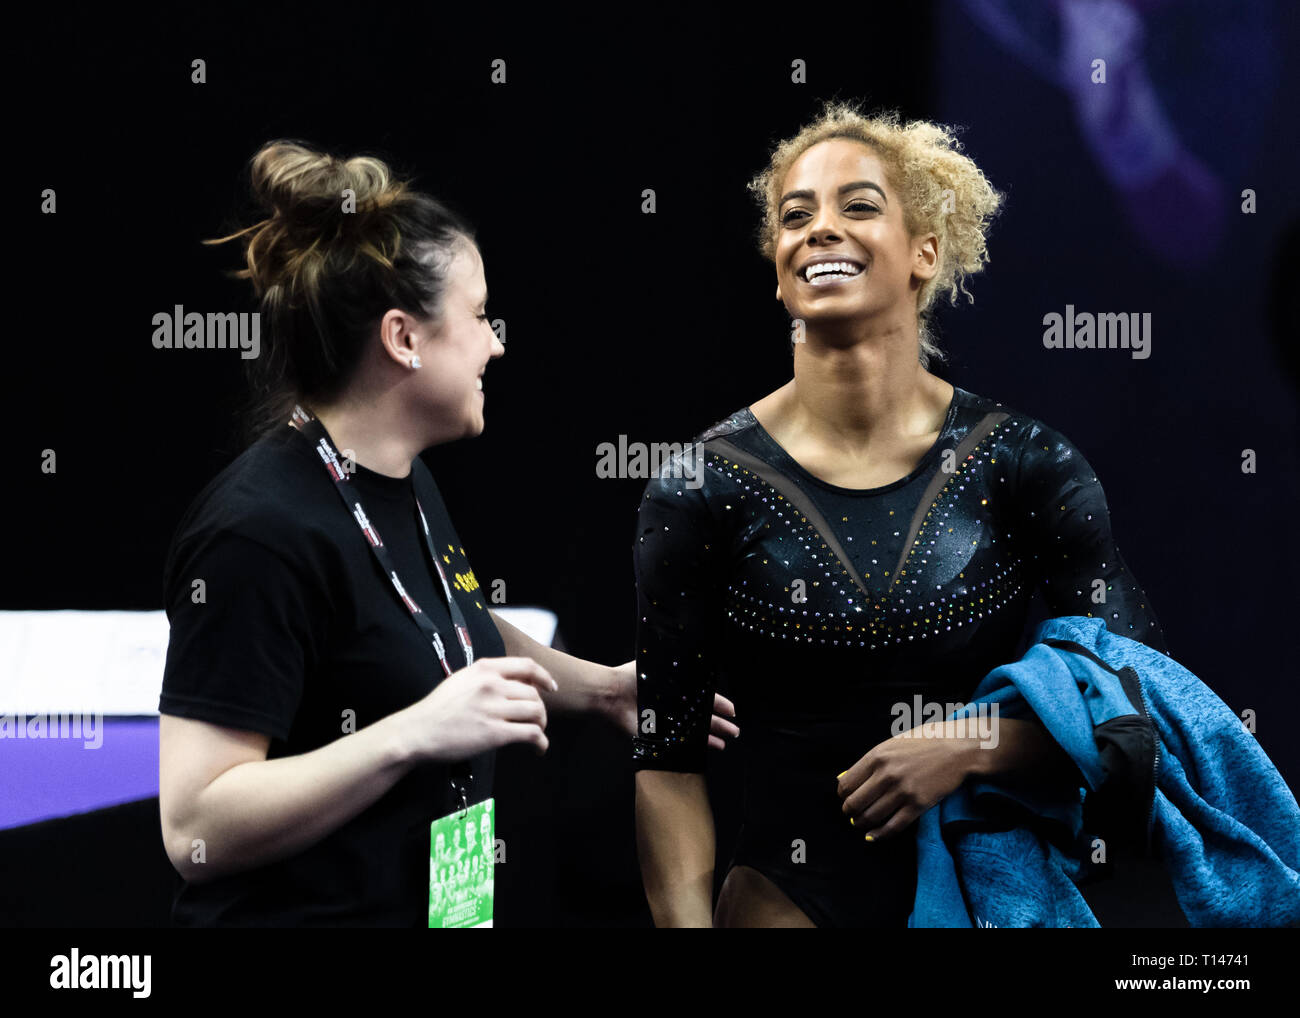 London, UK. 23rd March, 2019. Danusia Francis performs on the Beam during the Matchroom Multisport presents the 2019 Superstars of Gymnastics at The O2 Arena on Saturday, 23 March 2019. LONDON ENGLAND. Credit: Taka G Wu/Alamy News Stock Photo